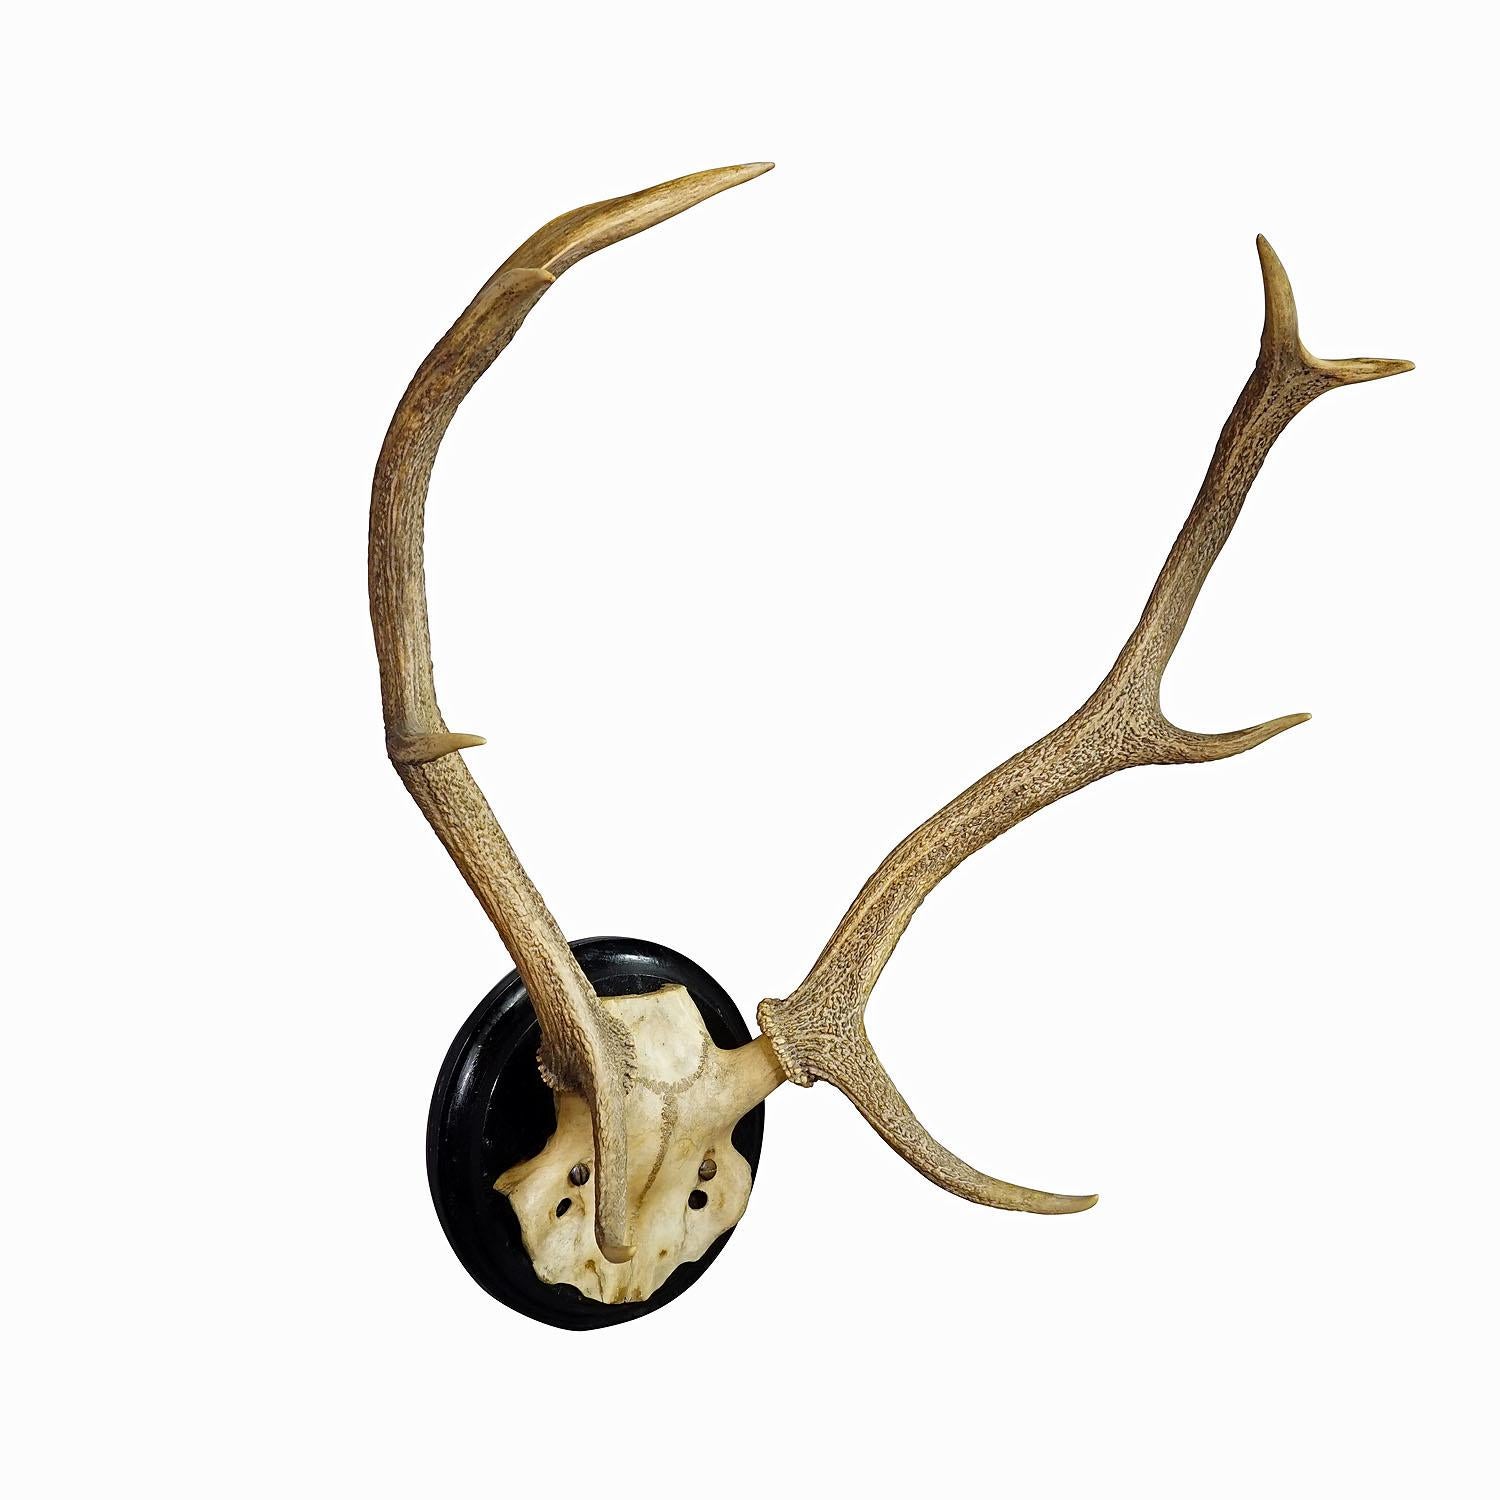 Large Black Forest Deer Trophy on Wooden Plaque - Germany ca. 1900s

An antique 8 pointer red deer (Cervus elaphus) trophy from the Black Forest. The trophy was shot around 1900. The large antlers are mounted on a turned wooden wall plaque with